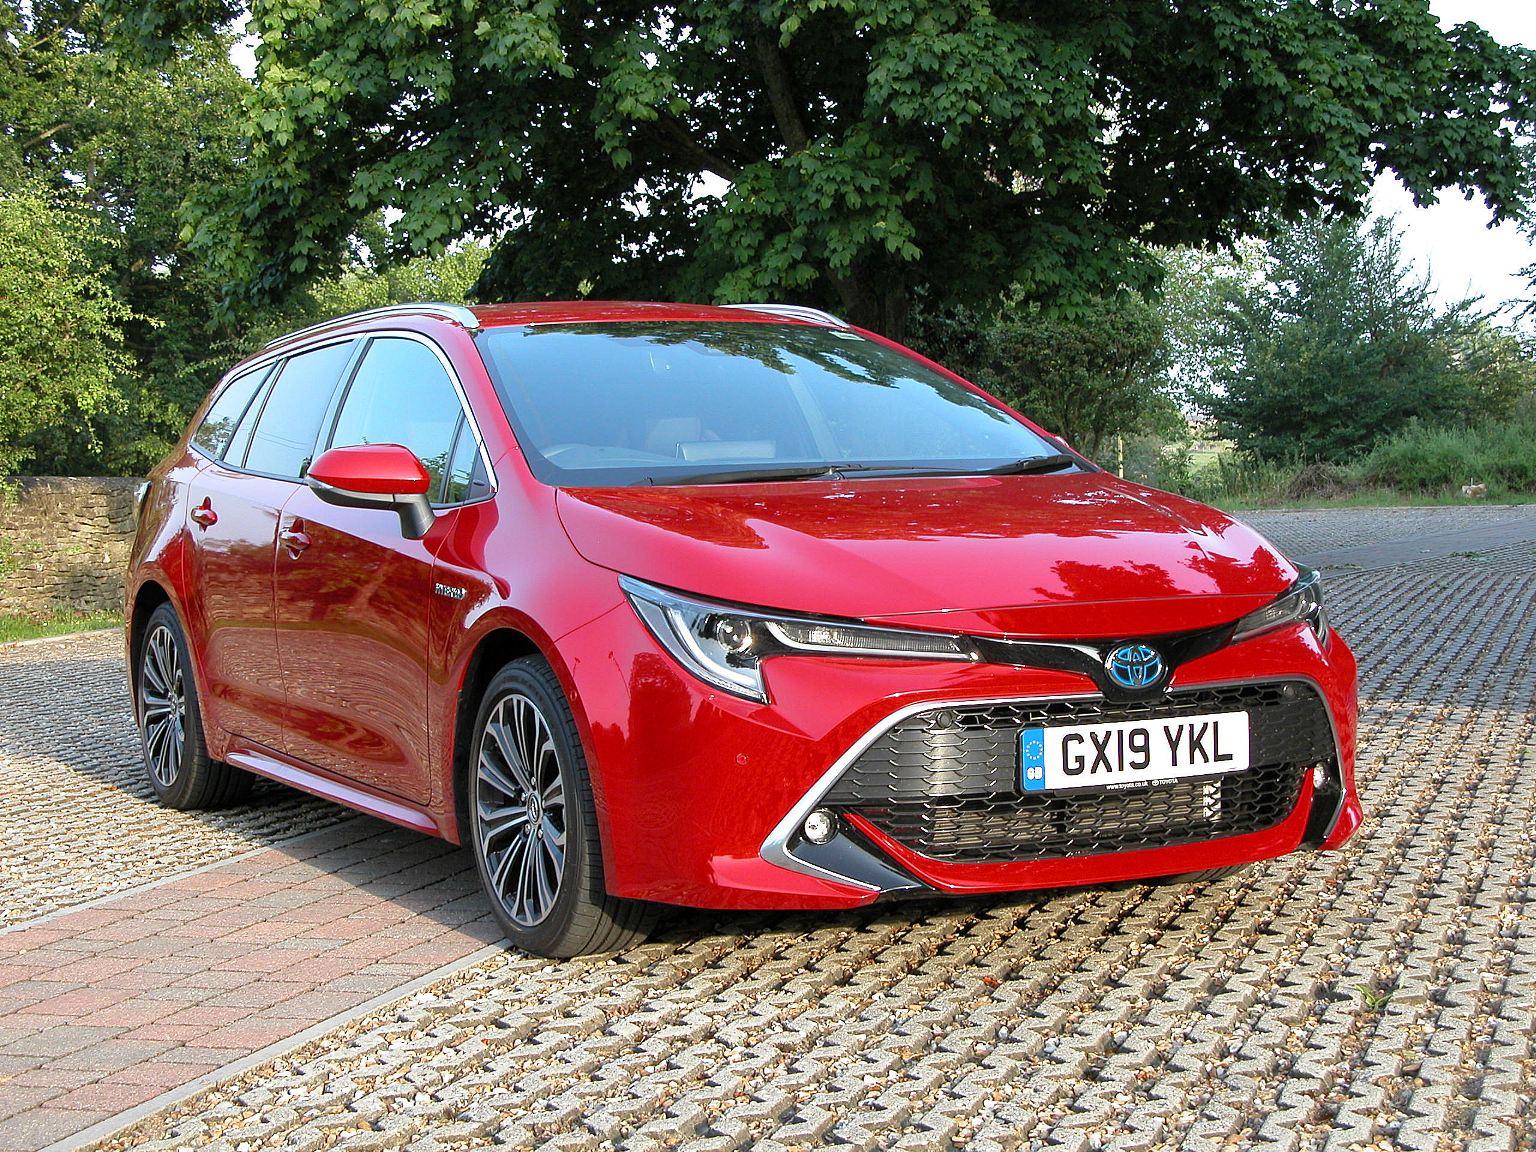 https://www.wheels-alive.co.uk/wp-content/uploads/2019/07/Toyota-Corolla-Touring-Sports-Hybrid-front-side-static-view.jpg